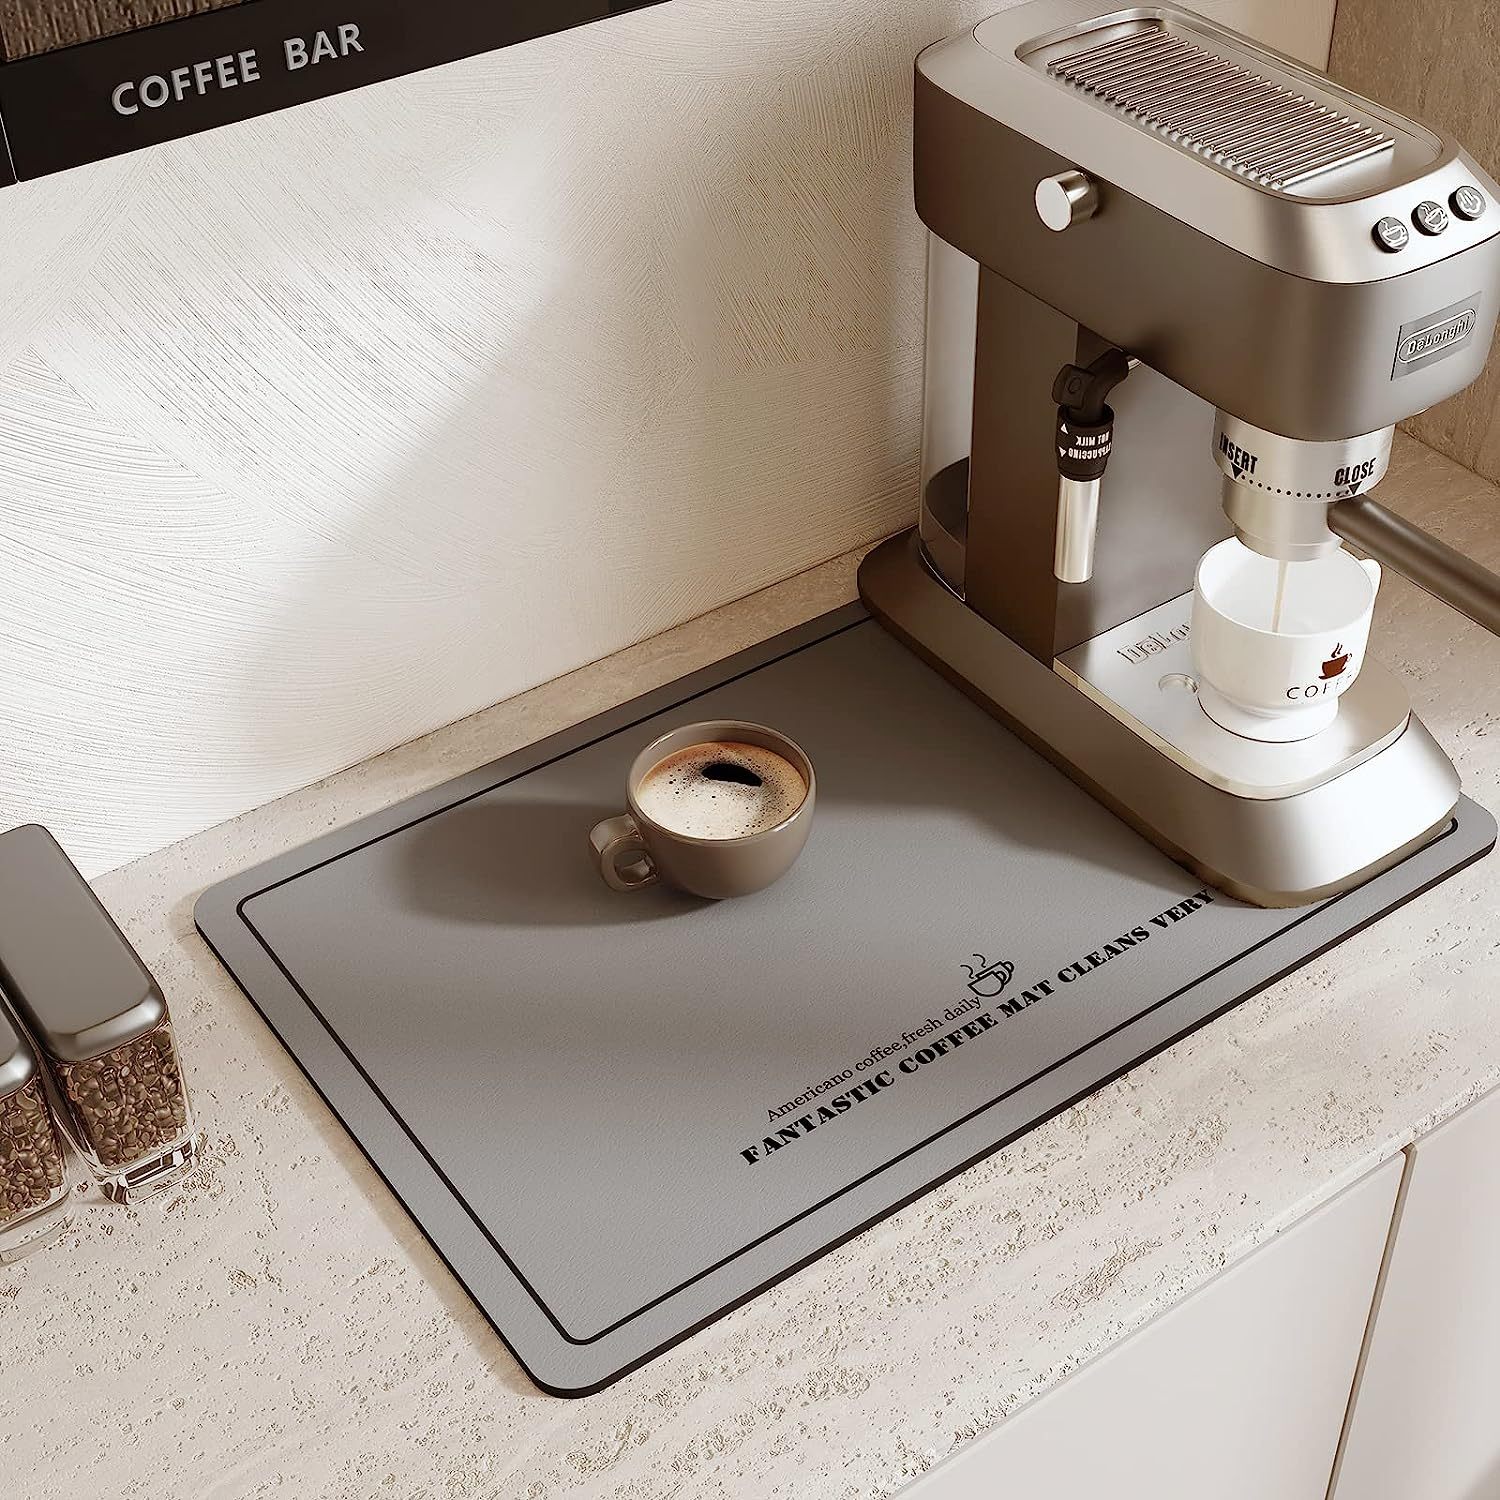 Best Coffee Accessories for an At Home Coffee Bar